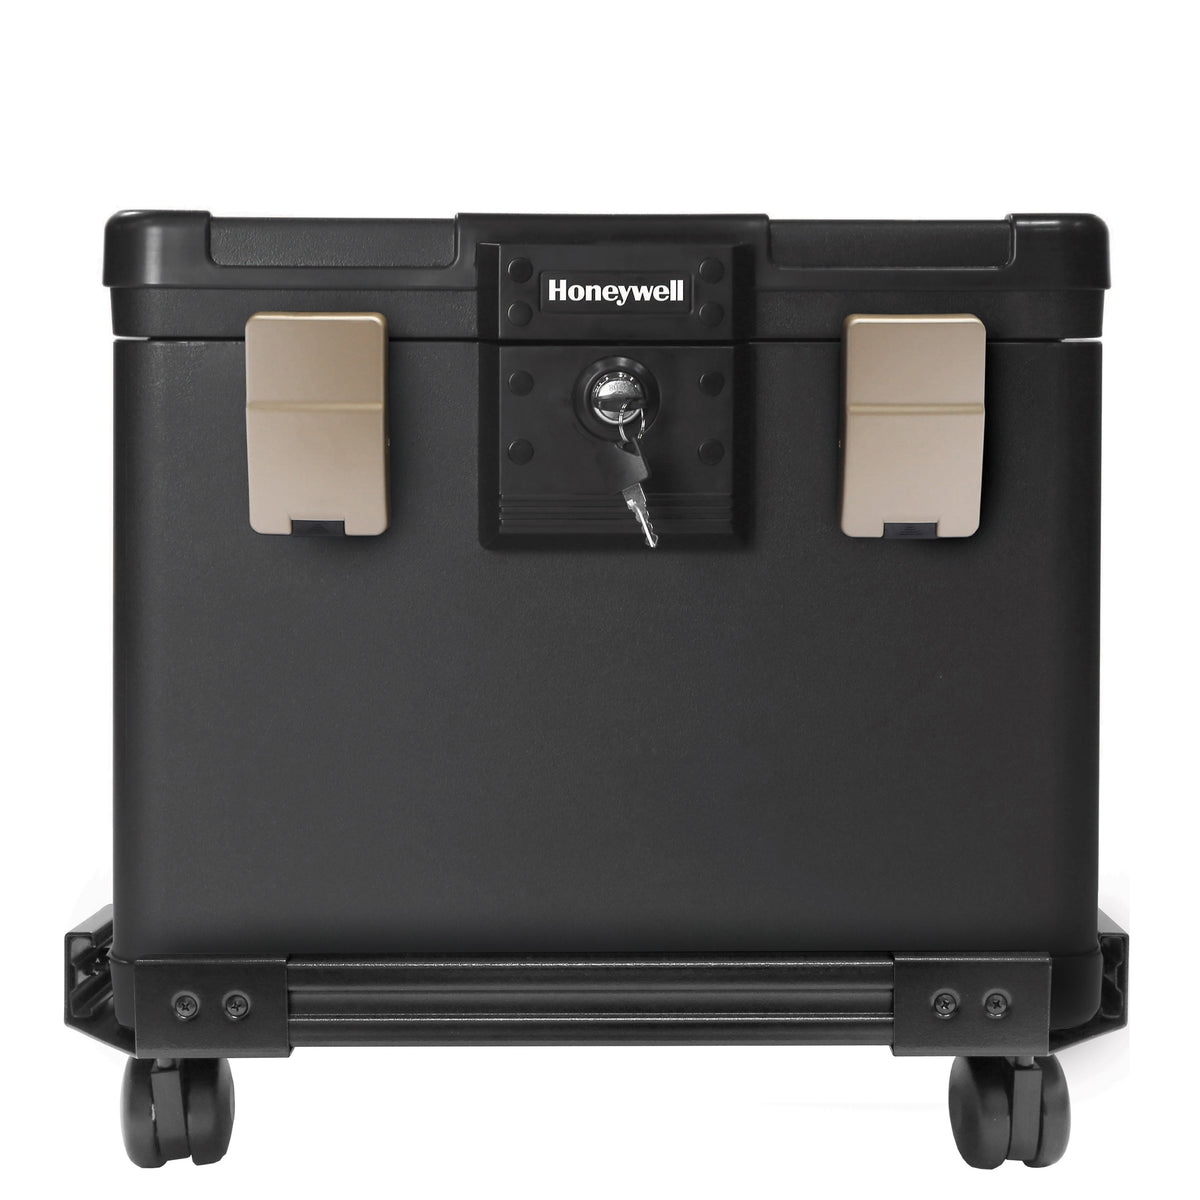 Honeywell 1108W 1 Hour UL Rated Fire Safe with Wheel Cart Front